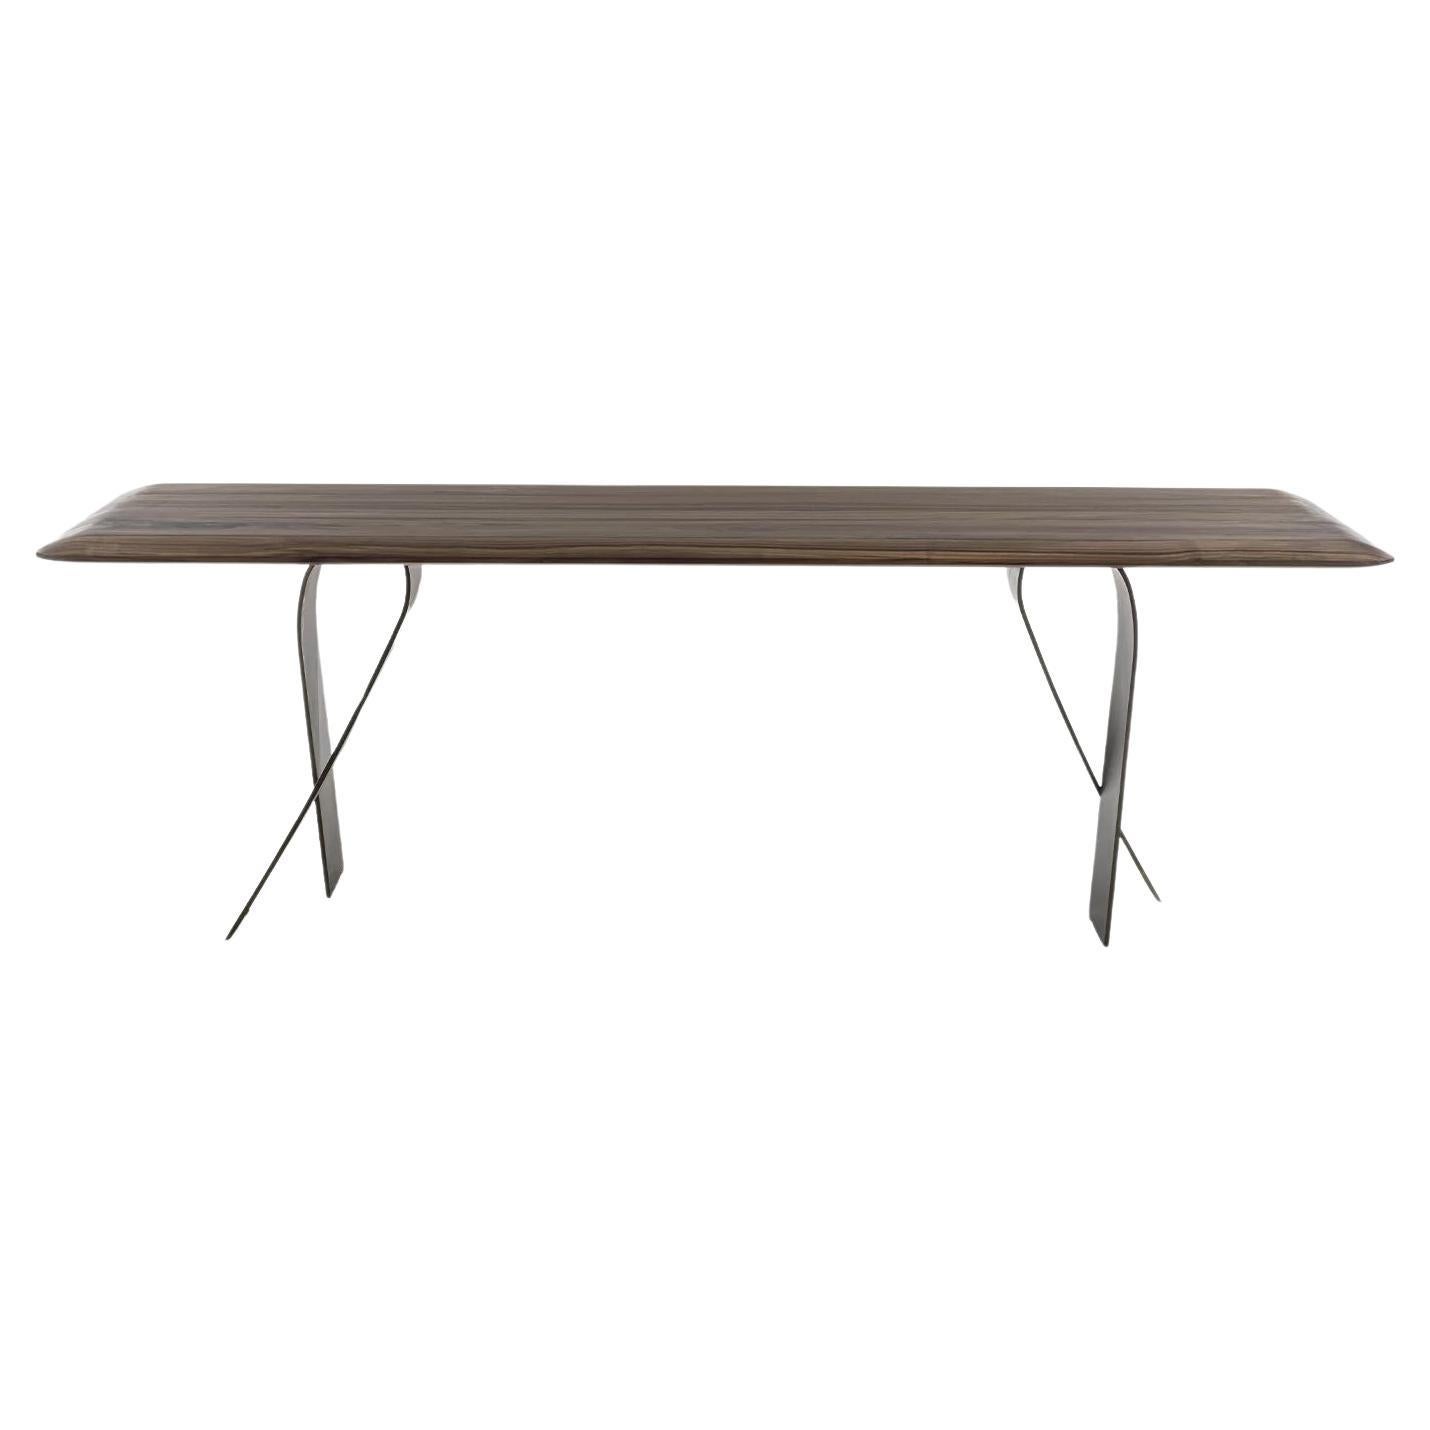 Nastro Wood & Iron Dining Table, Designed by Carlesi Tonelli, Made in Italy